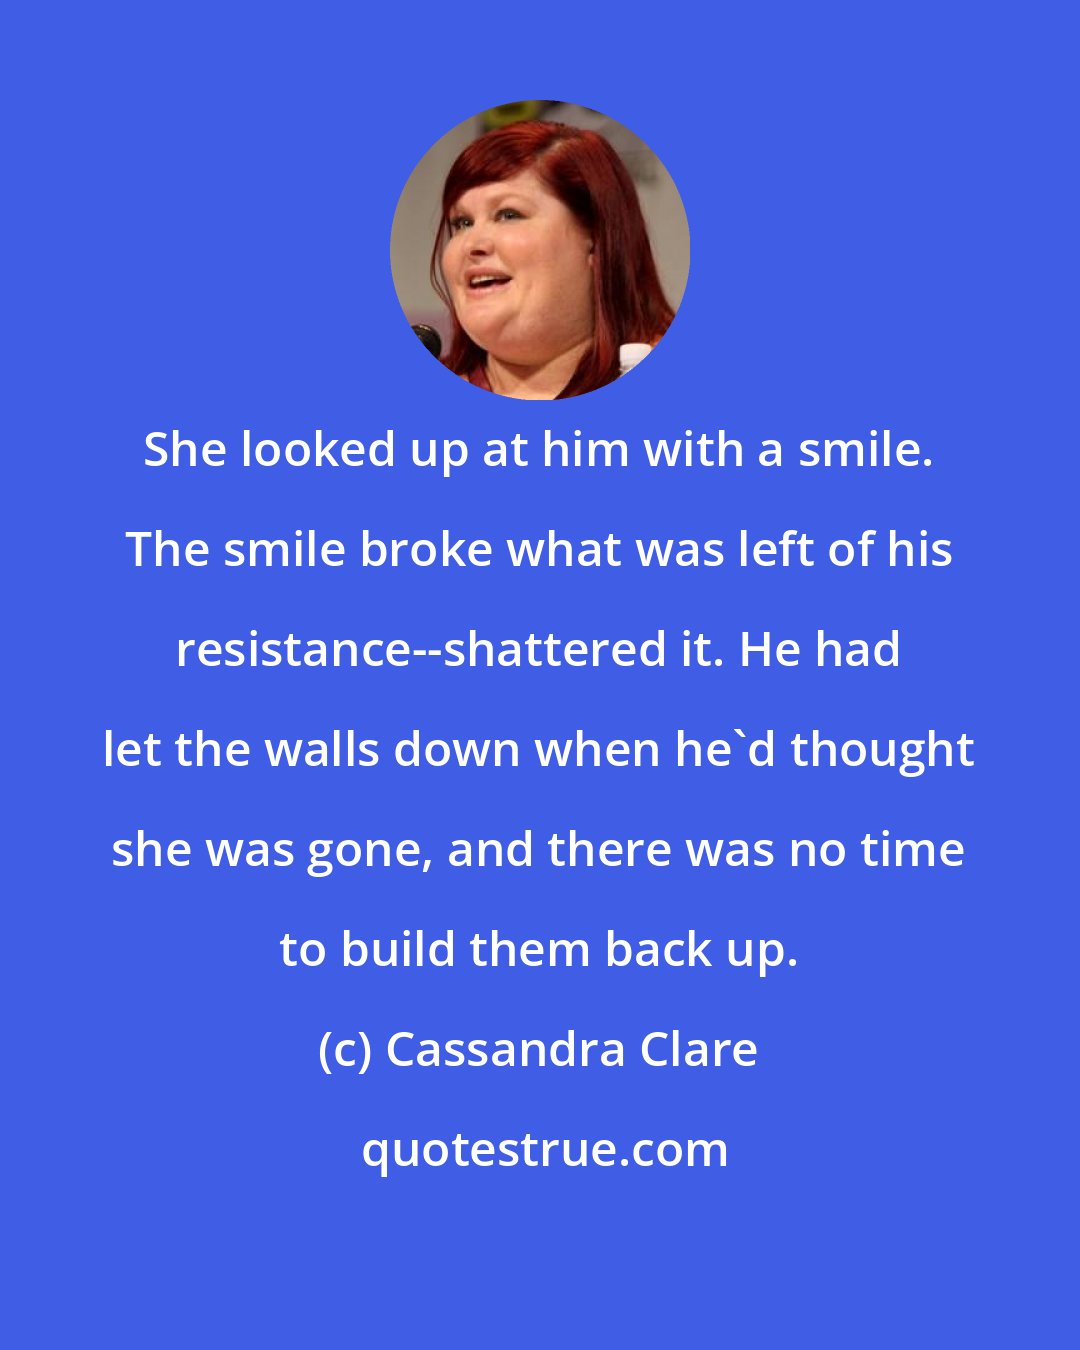 Cassandra Clare: She looked up at him with a smile. The smile broke what was left of his resistance--shattered it. He had let the walls down when he'd thought she was gone, and there was no time to build them back up.